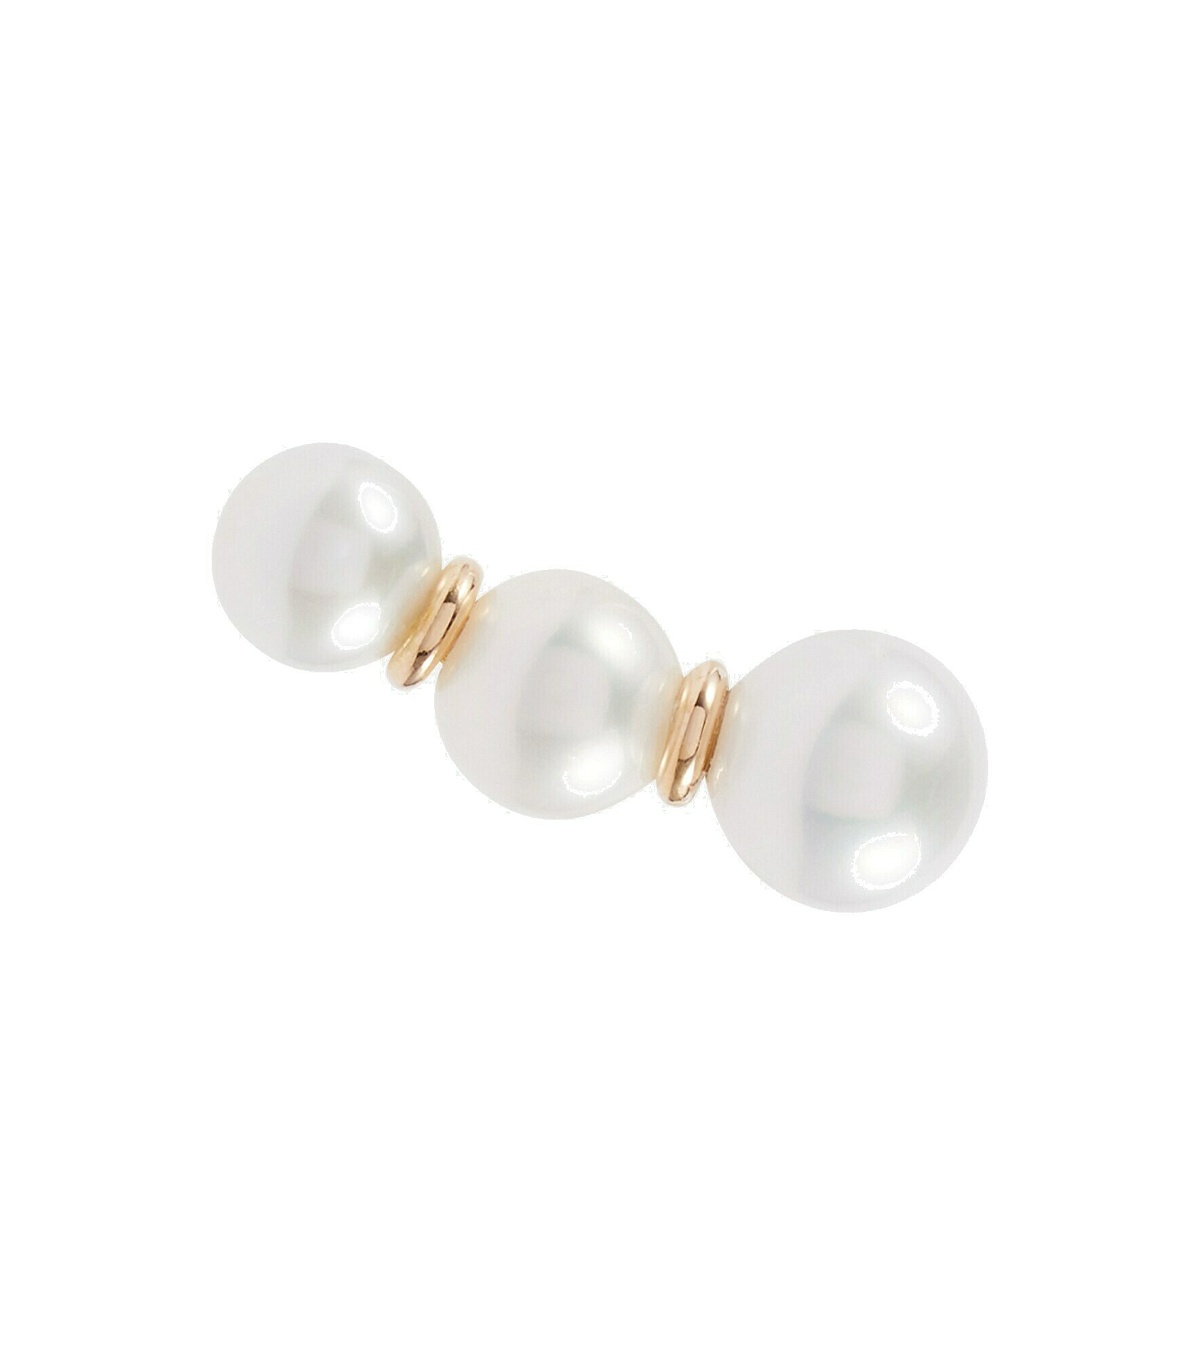 Sophie Bille Brahe - Trois Perles 14kt yellow gold single earring with ...